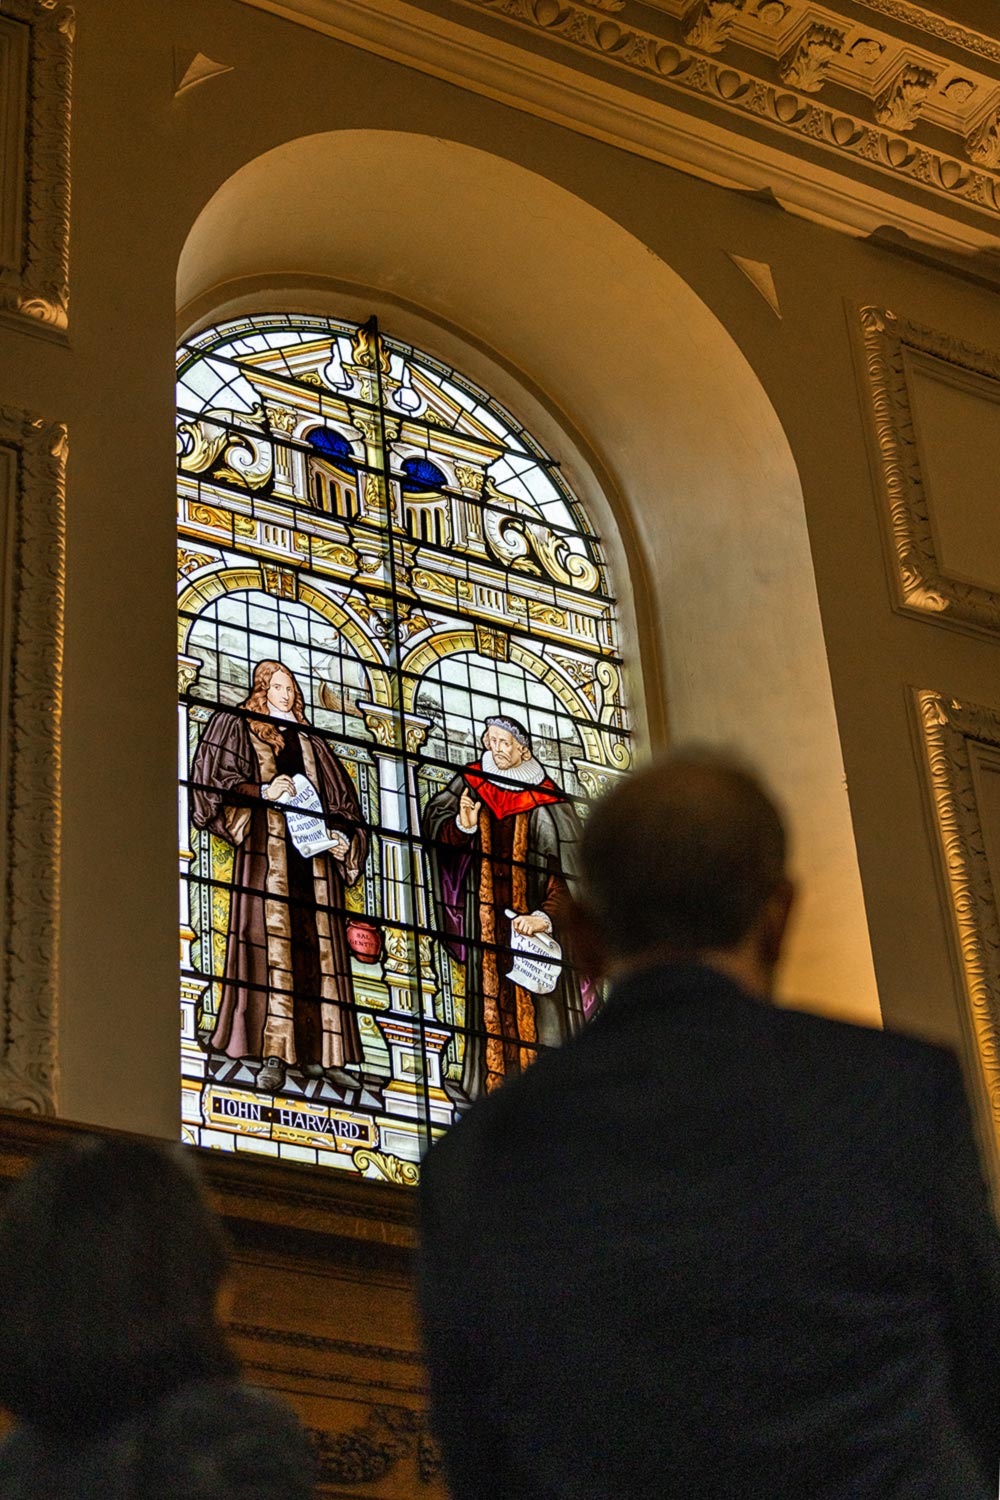 A man looks up at a stained glass window depicting John ŷպƵ and another scholar.